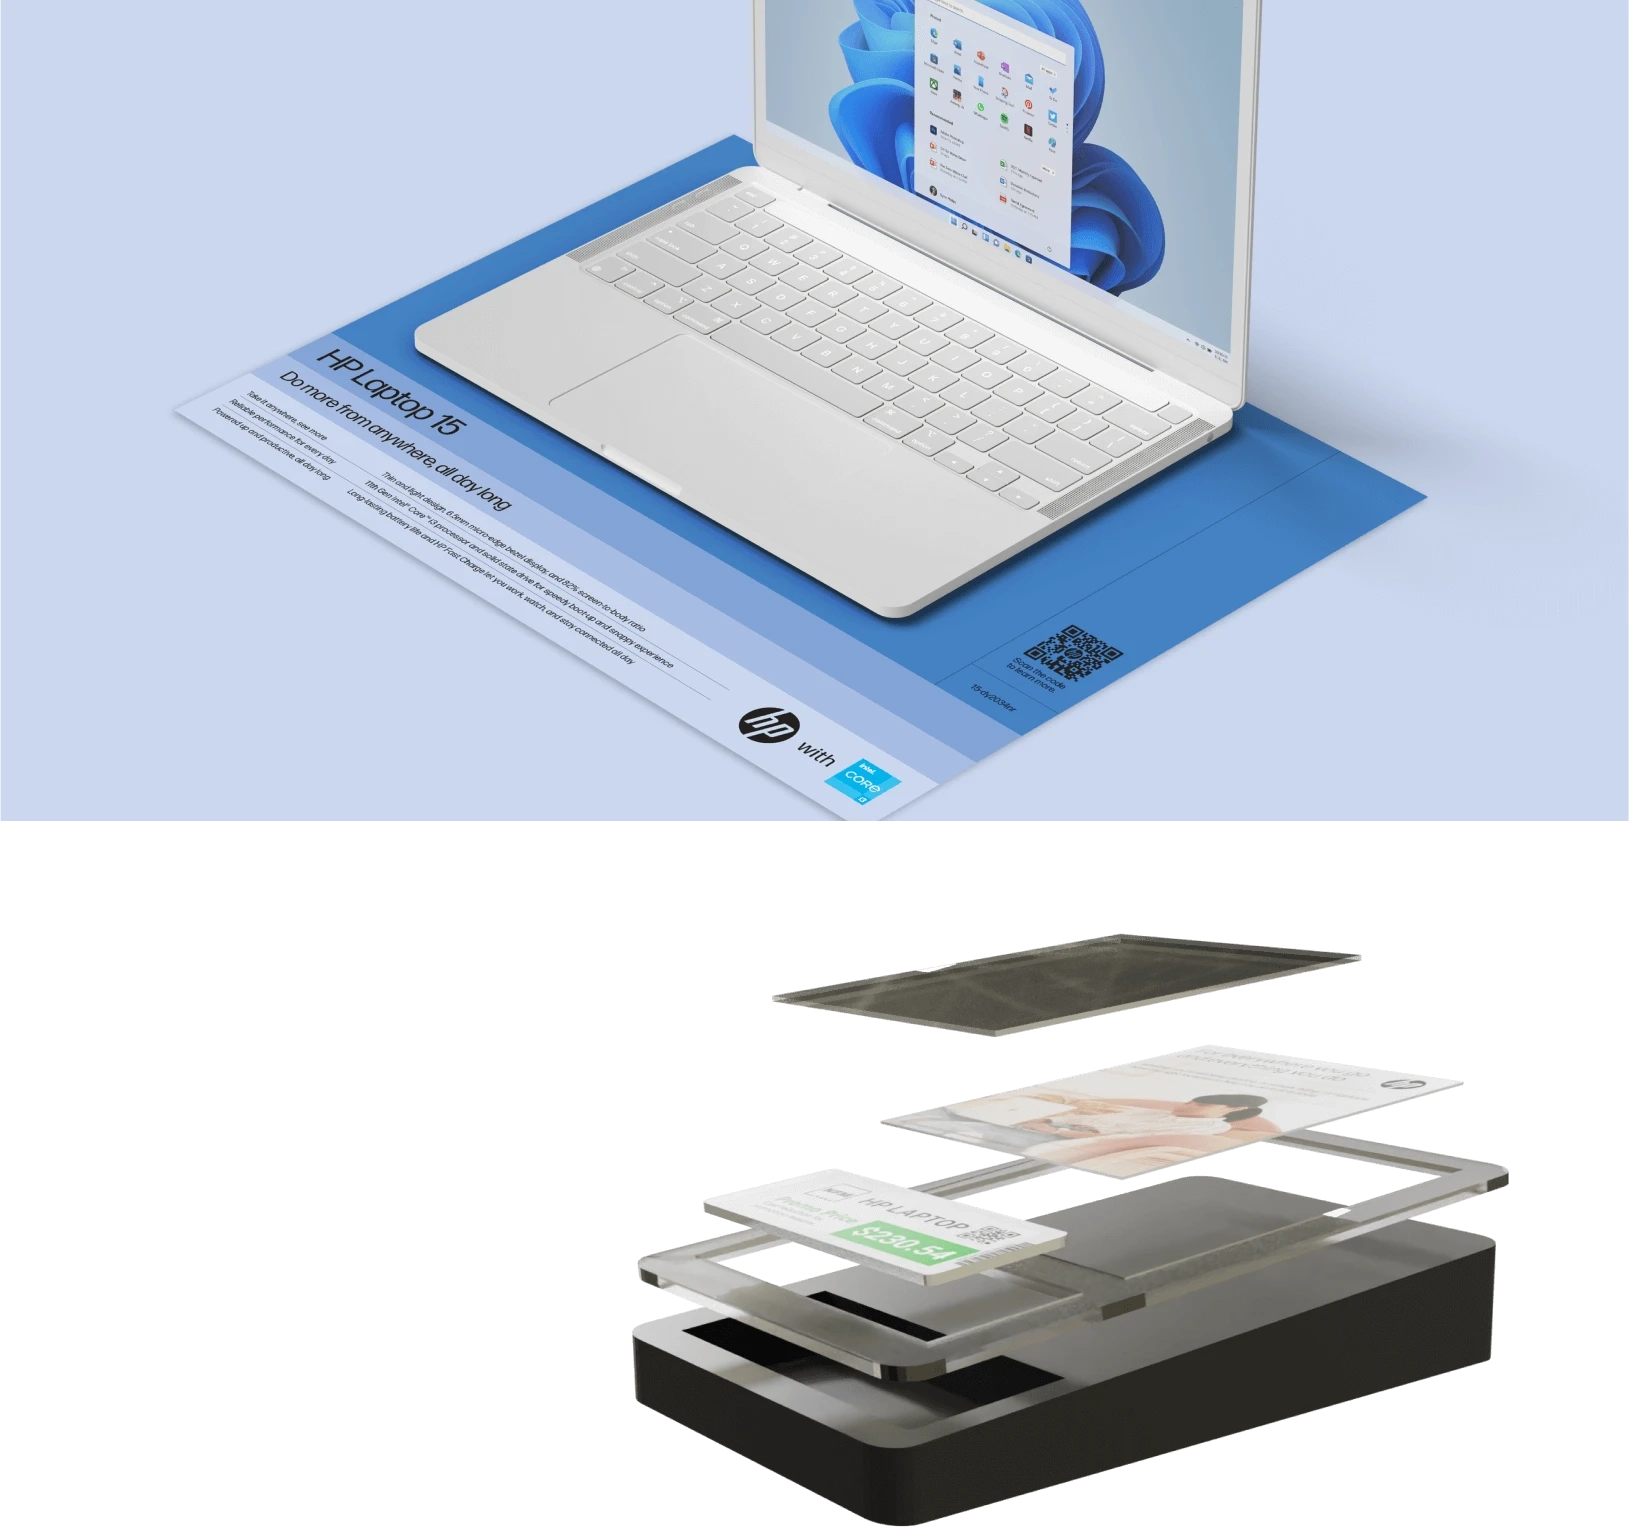 Examples of HP retail merchandising: a laptop computer placed on a product mat, and an exploded view of a premium fact tag holder.